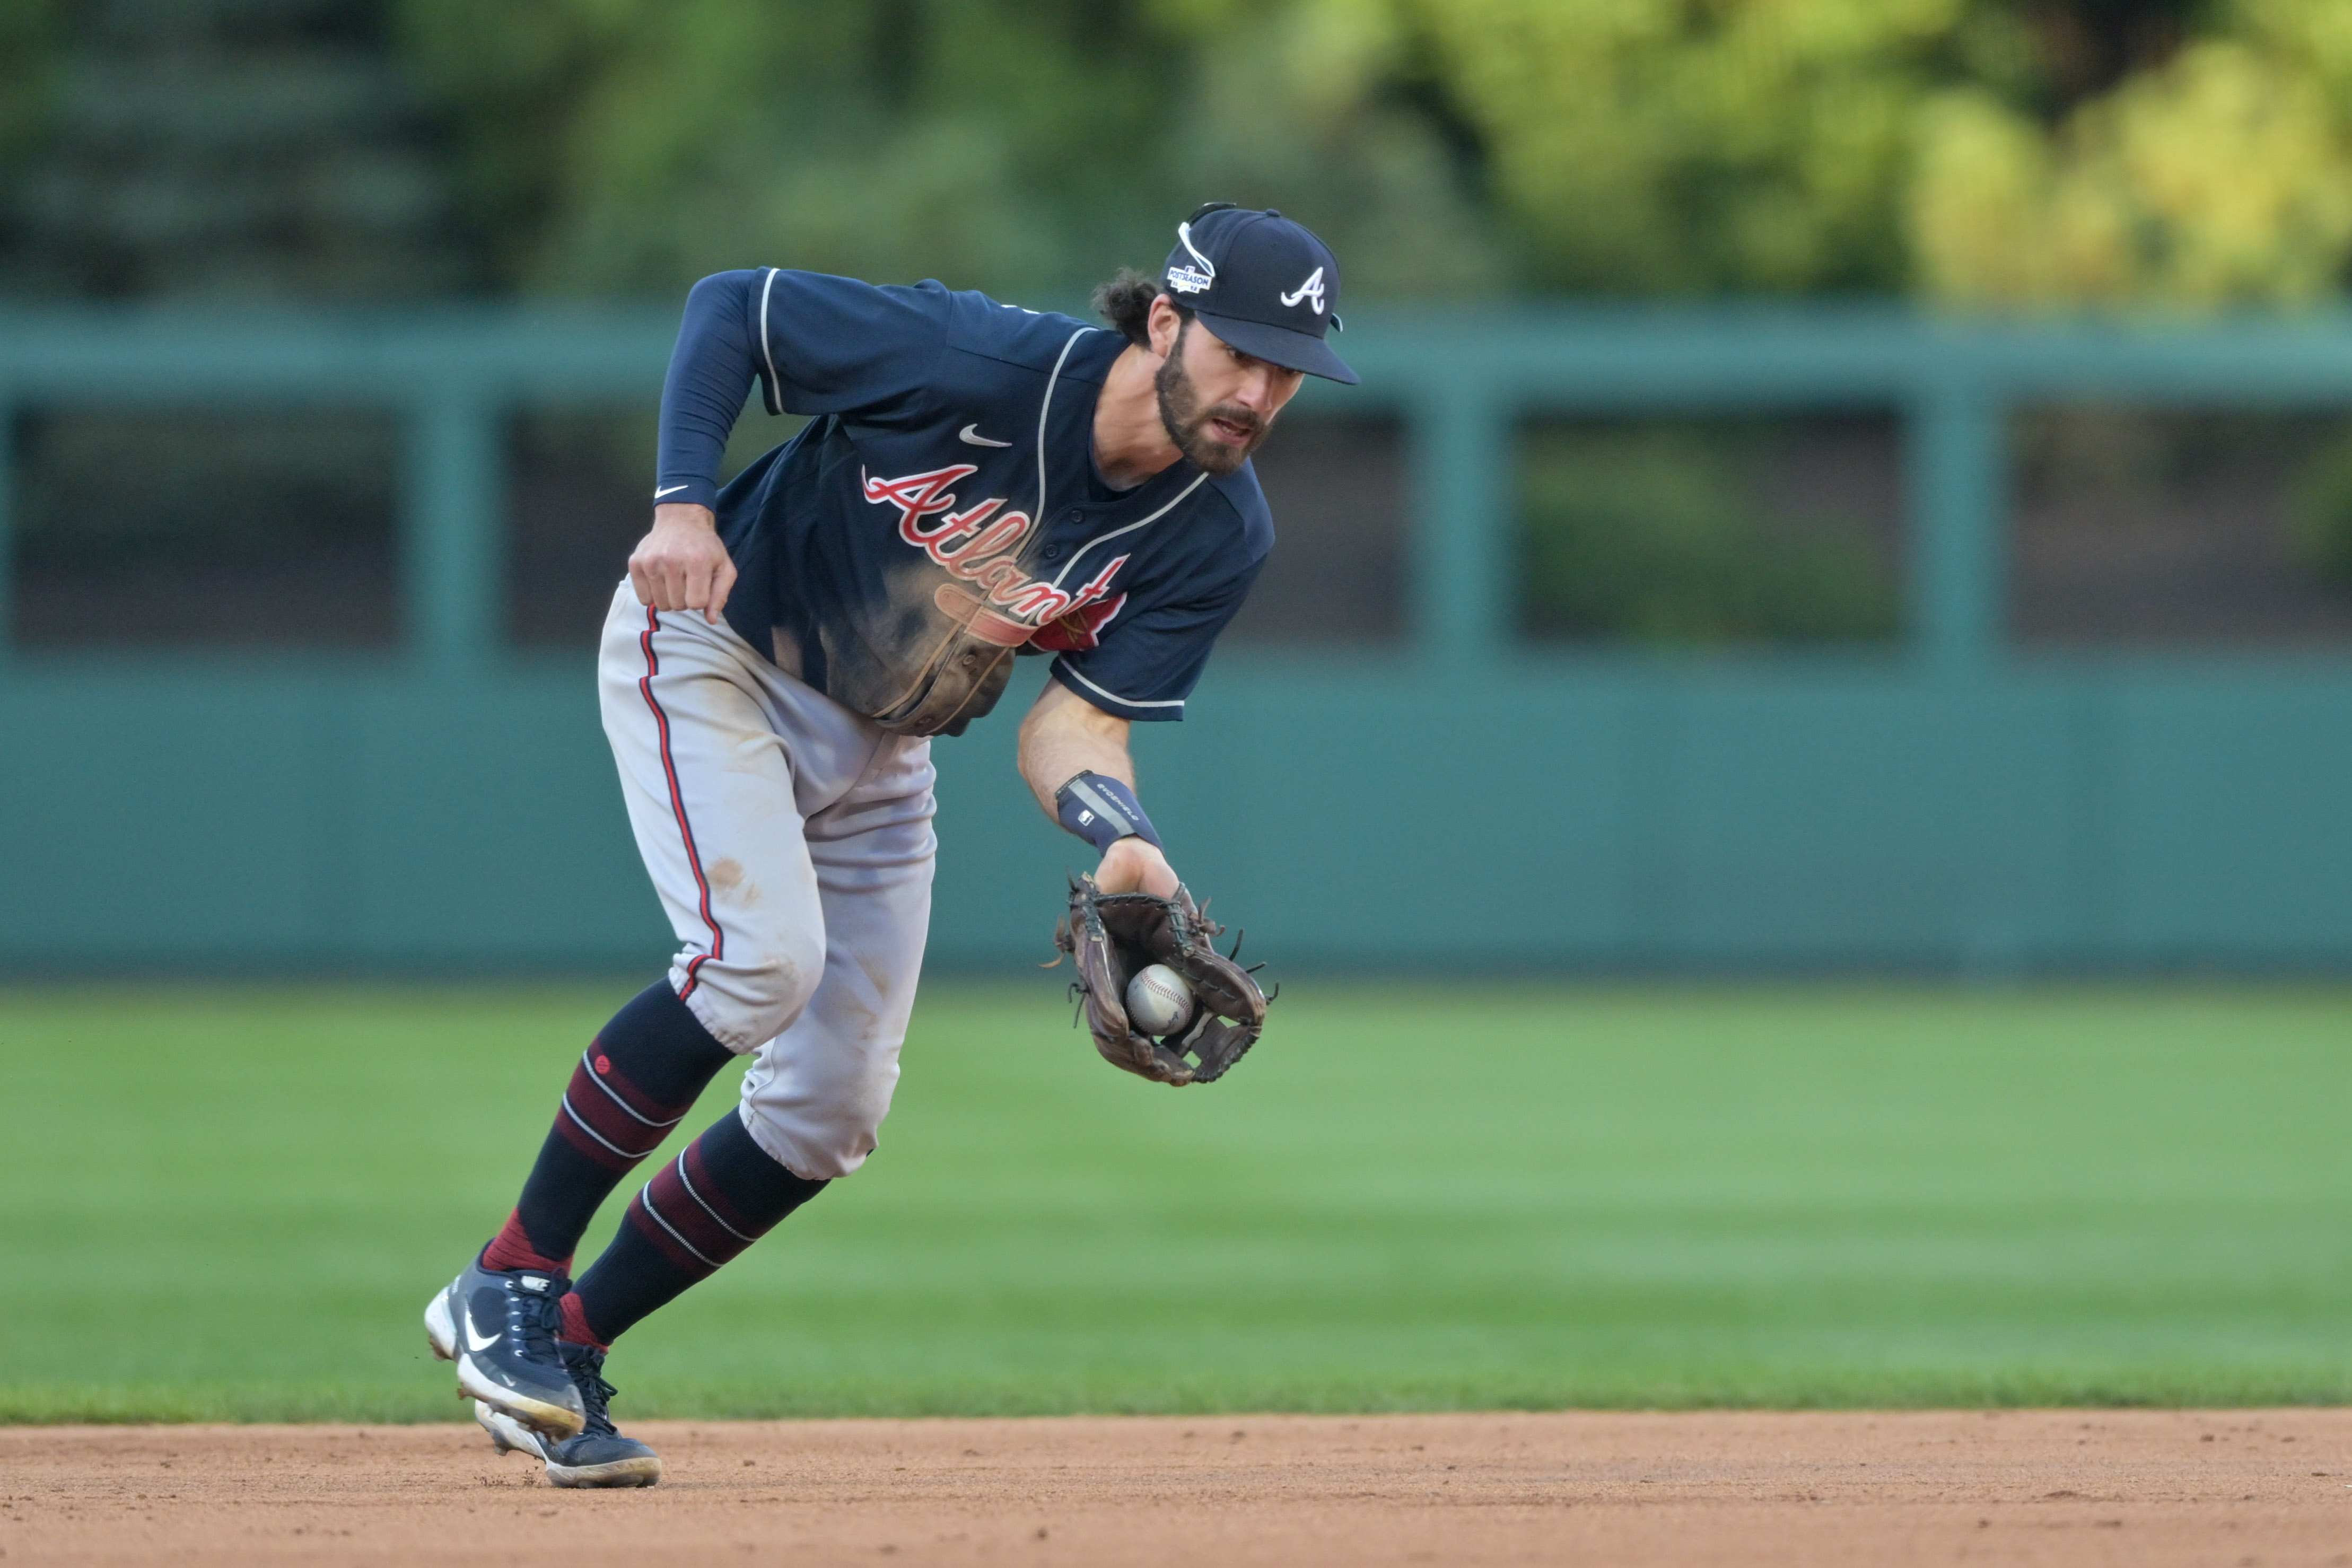 Shortstop Dansby Swanson of the Atlanta Braves receives the ball during the eighth inning in Game 4 of the National League Division Series against the Philadelphia Phillies at Citizens Bank Park in Philadelphia, Pennsylvania, October 15, 2022. /CFP